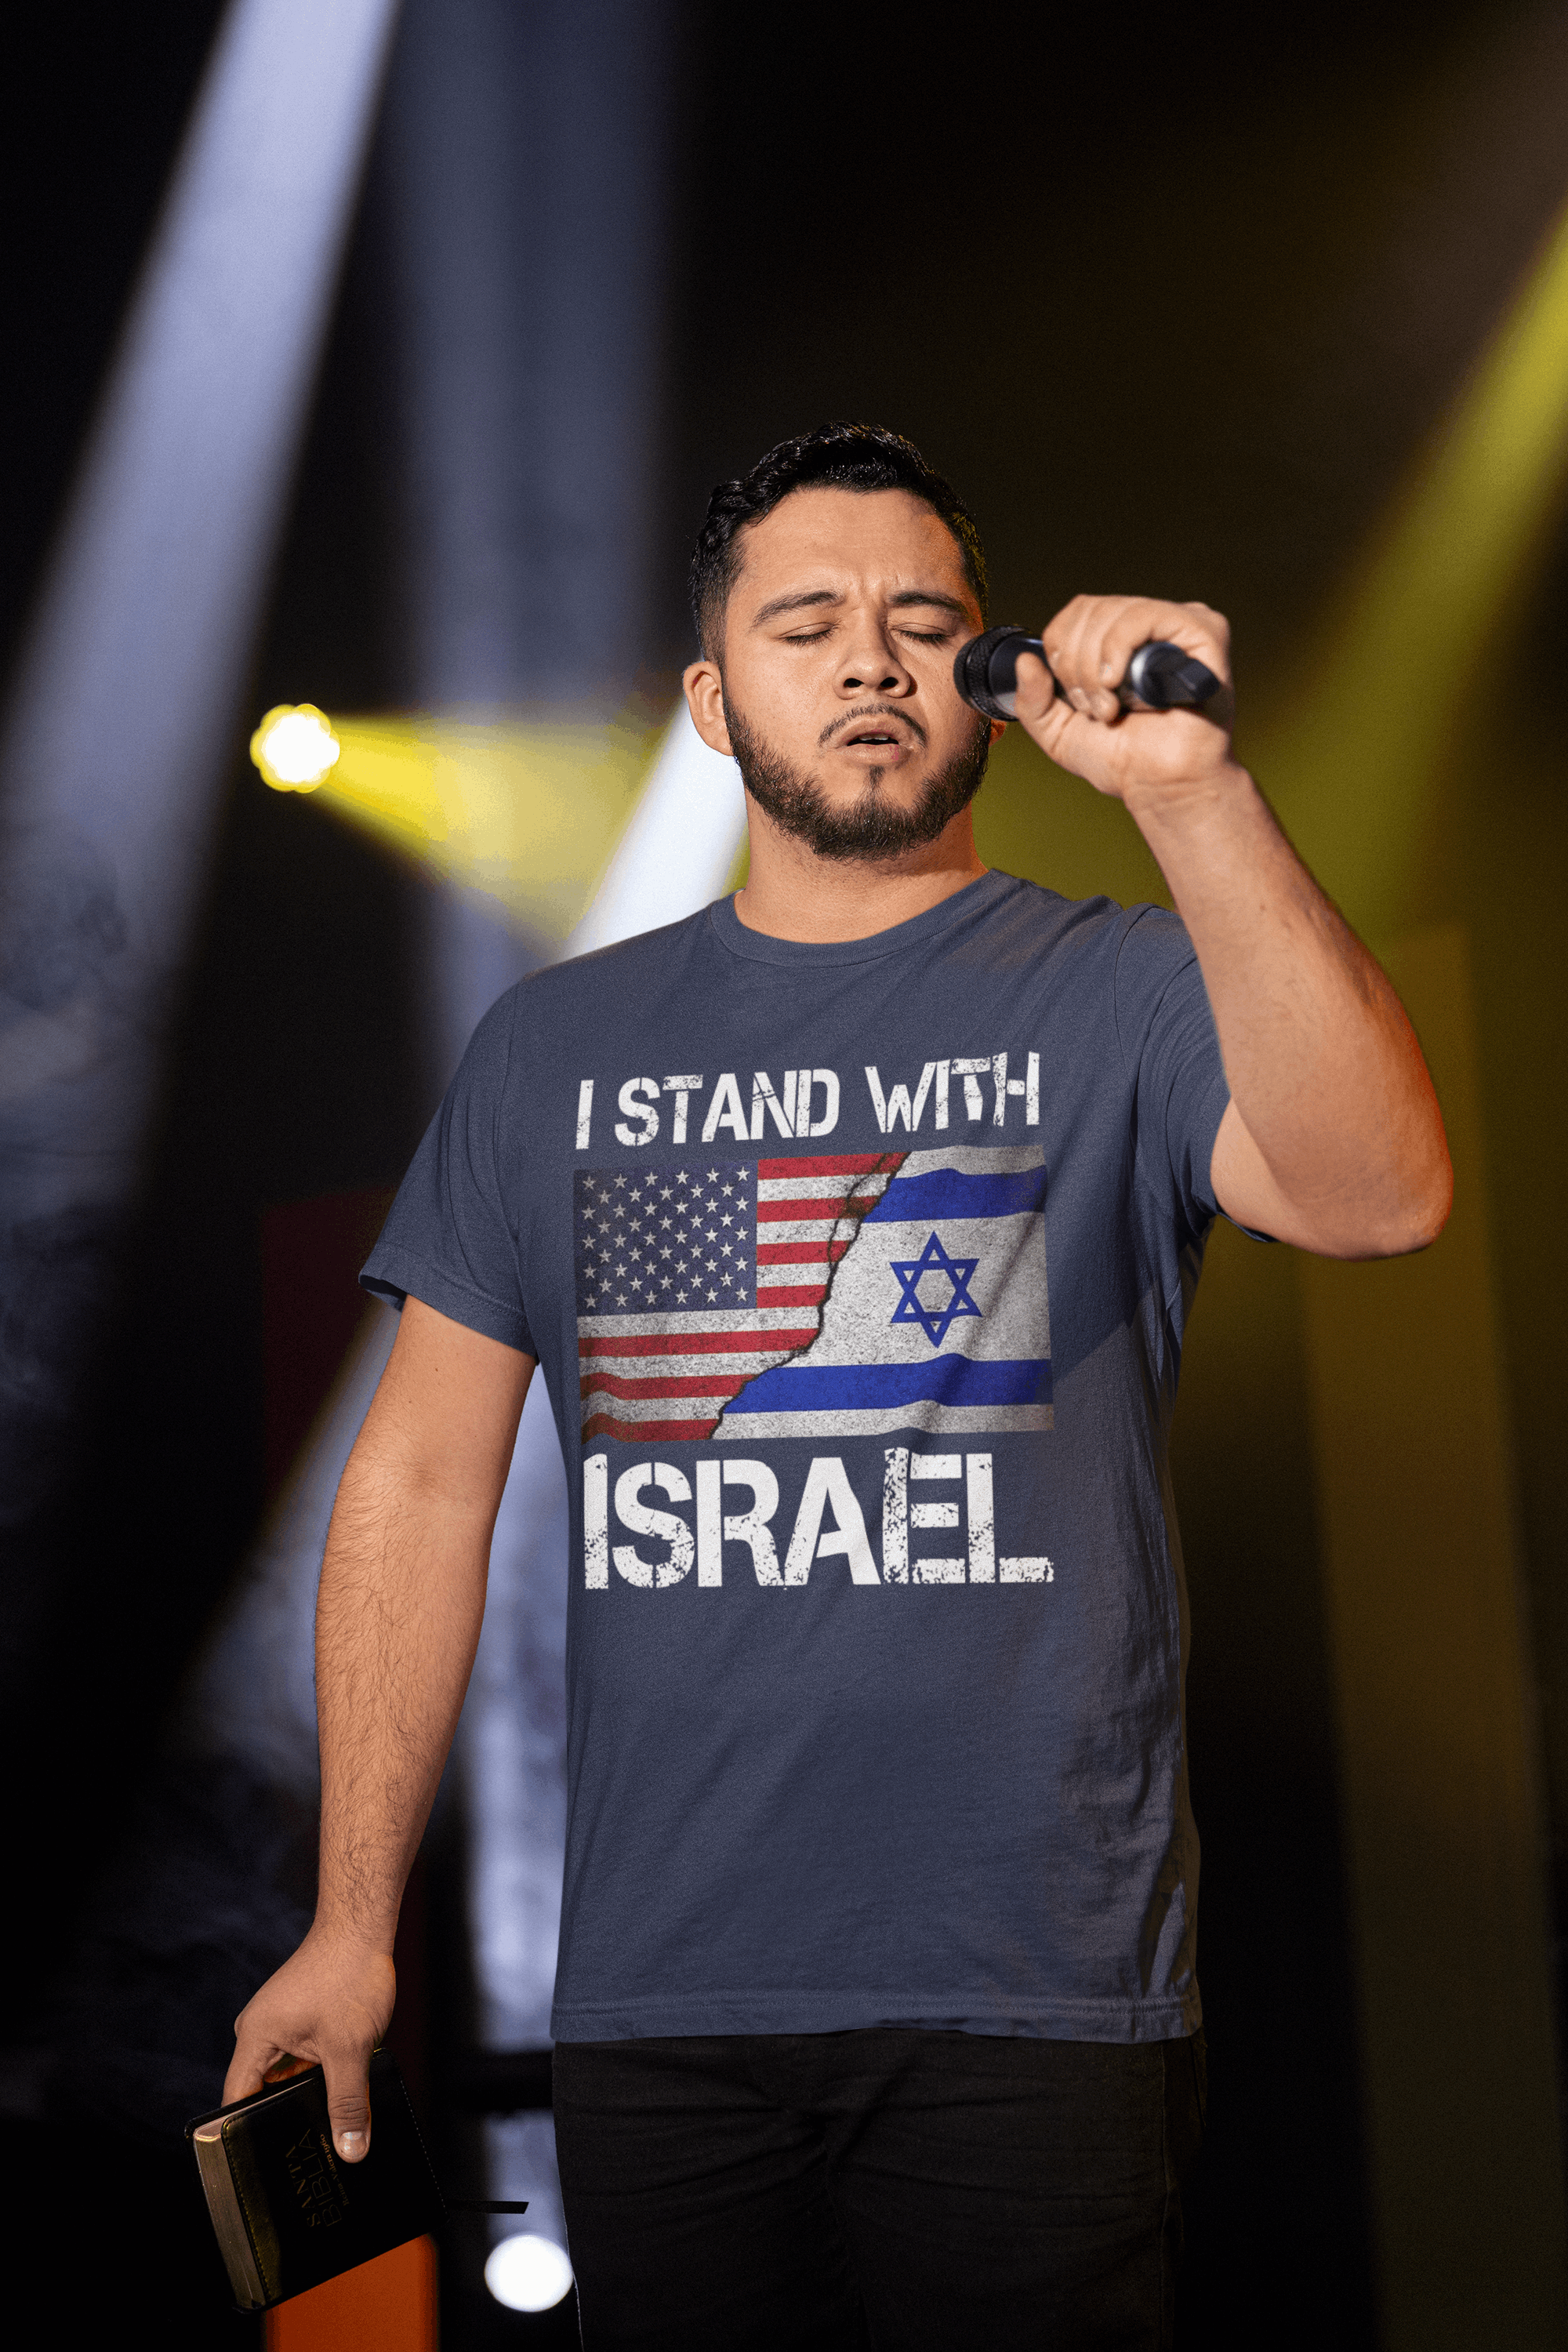 I Stand With Israel T-shirt